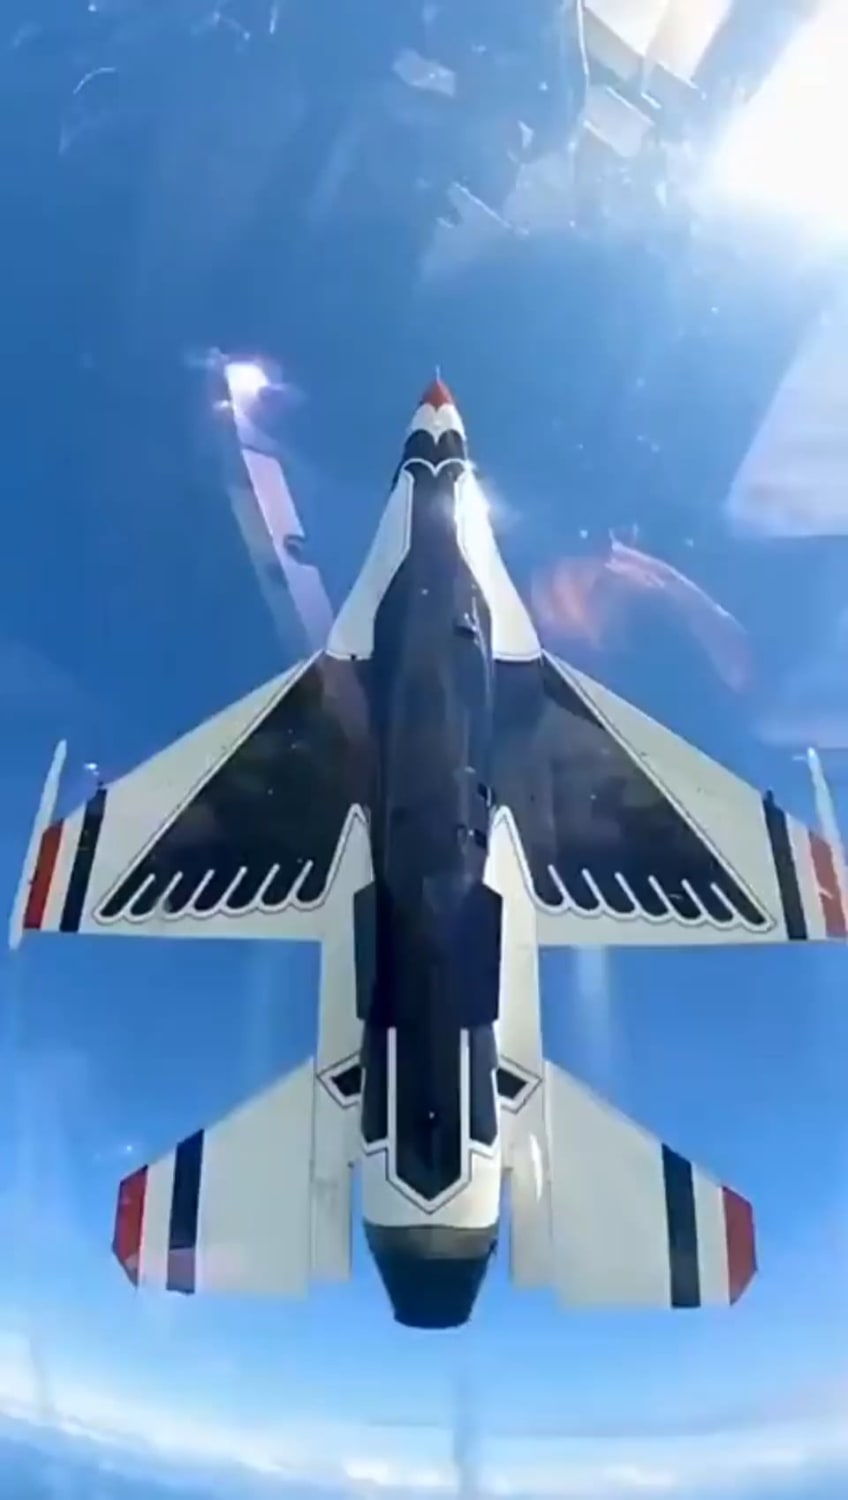 Amazing view, Flying with the Thunderbirds.